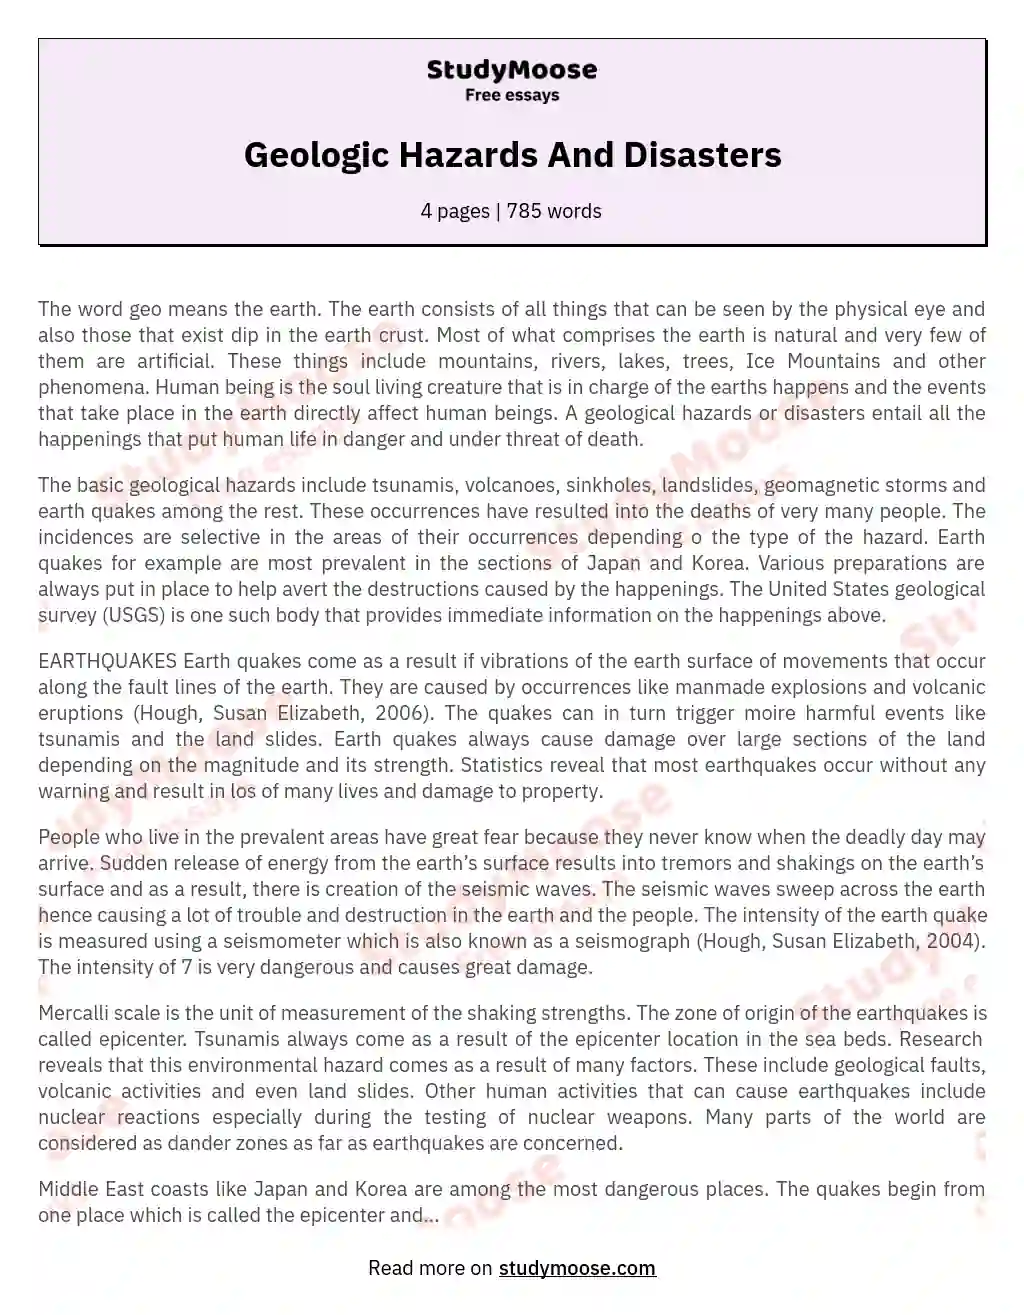 Geologic Hazards And Disasters essay